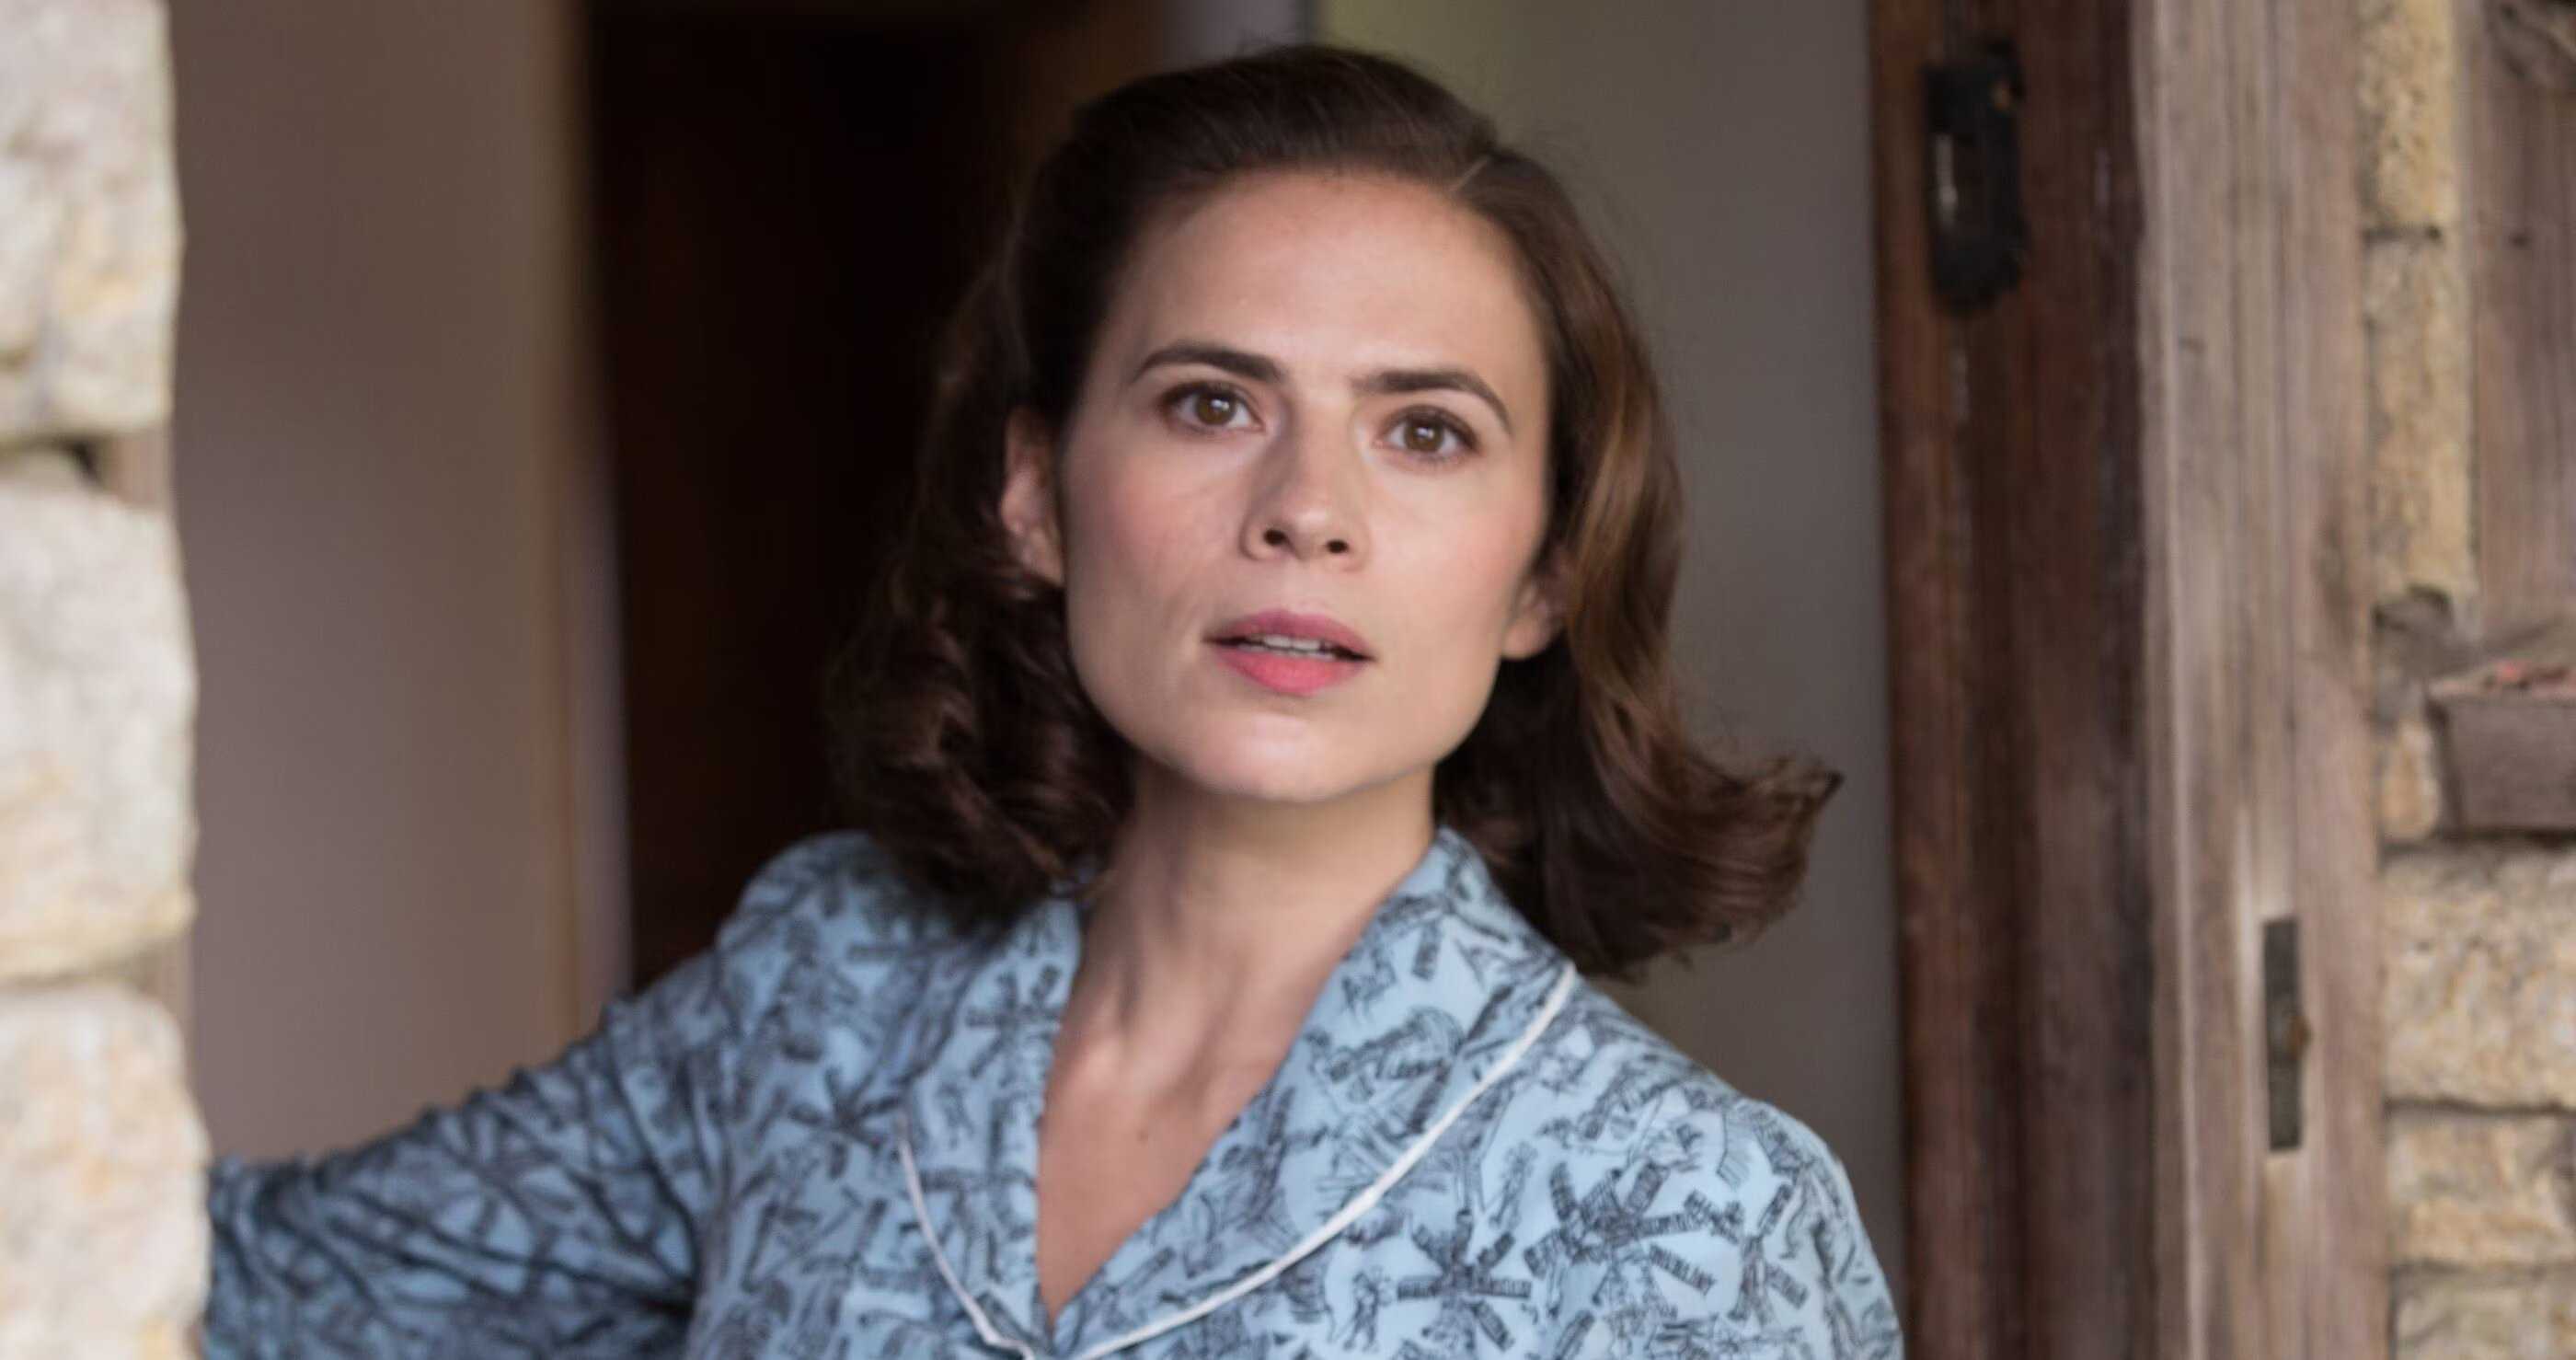 Inside scoop: Hayley Atwell's struggle and triumph in Marvel's universe